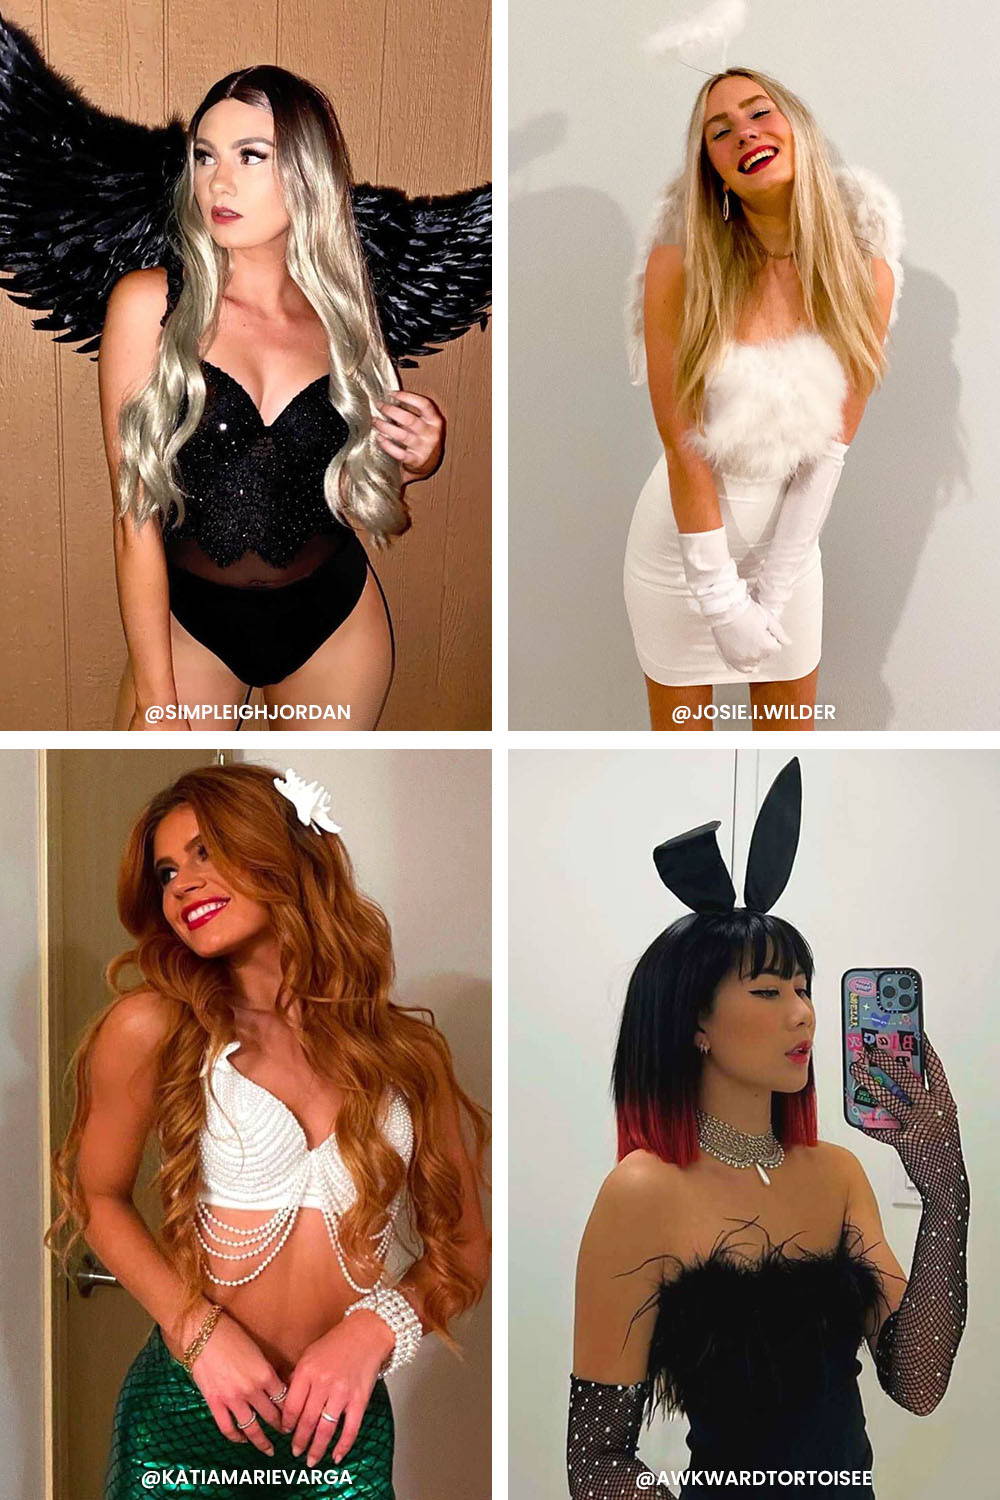 Visit Windsor's 2023 Halloween Costume blogs to get inspo including the 10 best women’s Halloween costumes for a post-worthy look featuring UGC of dark angels, classic heavenly bodies, little mermaids, bunny costumes, and more! 